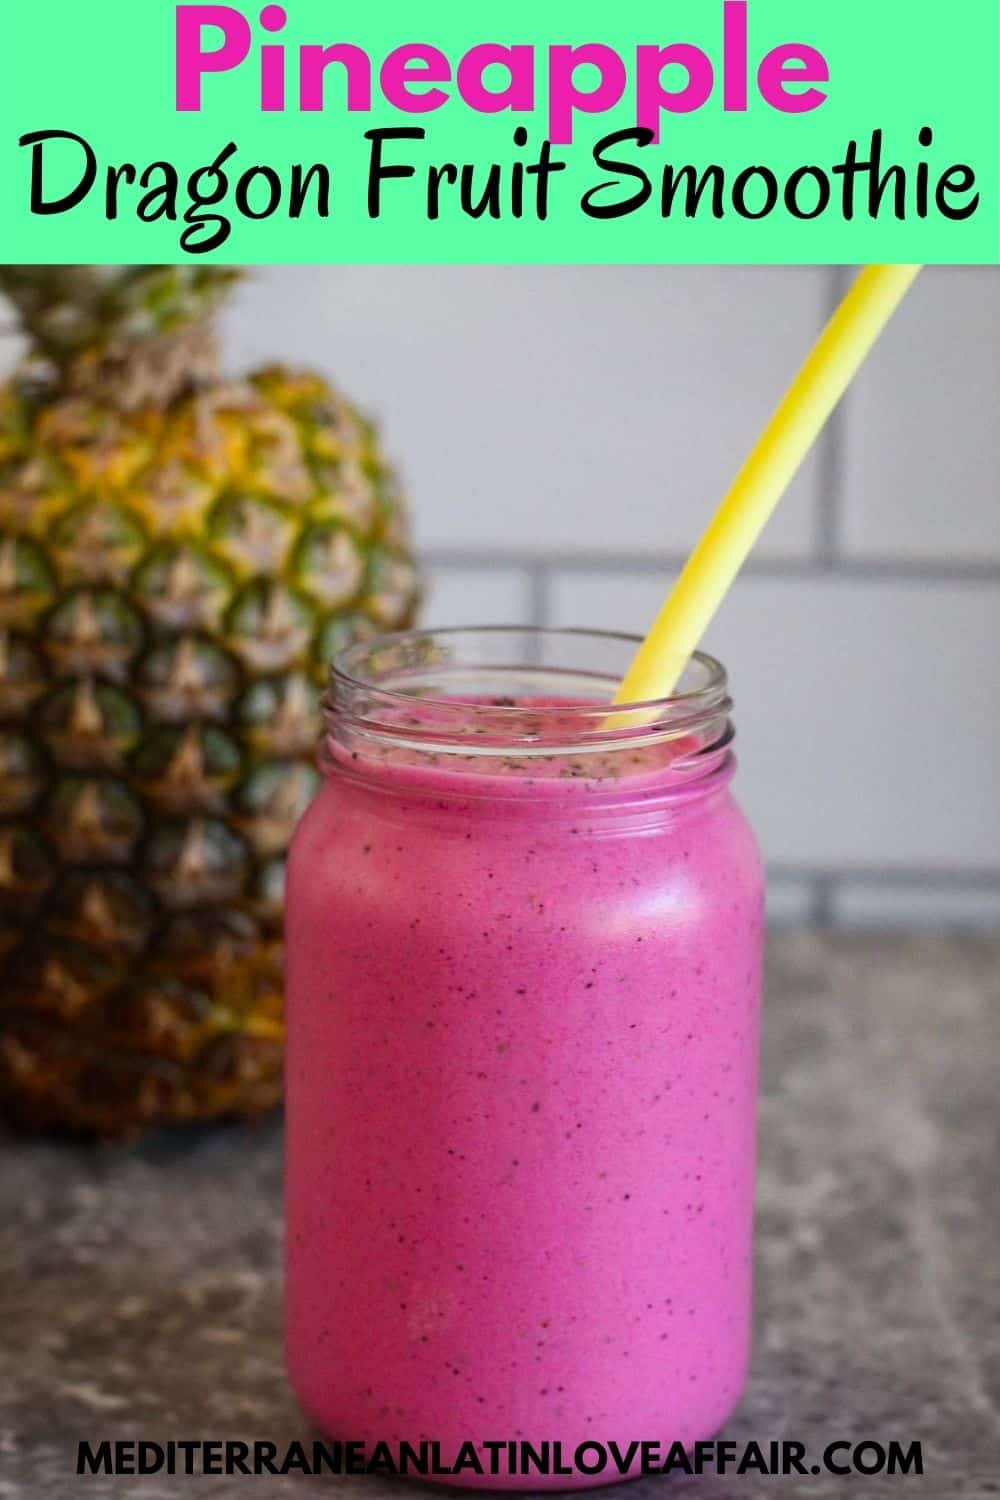 An image prepared for Pinterest, it shows the pineapple dragon fruit smoothie jar with a straw in the middle. A title bar at the top with the name of the recipe and a website link at the bottom.